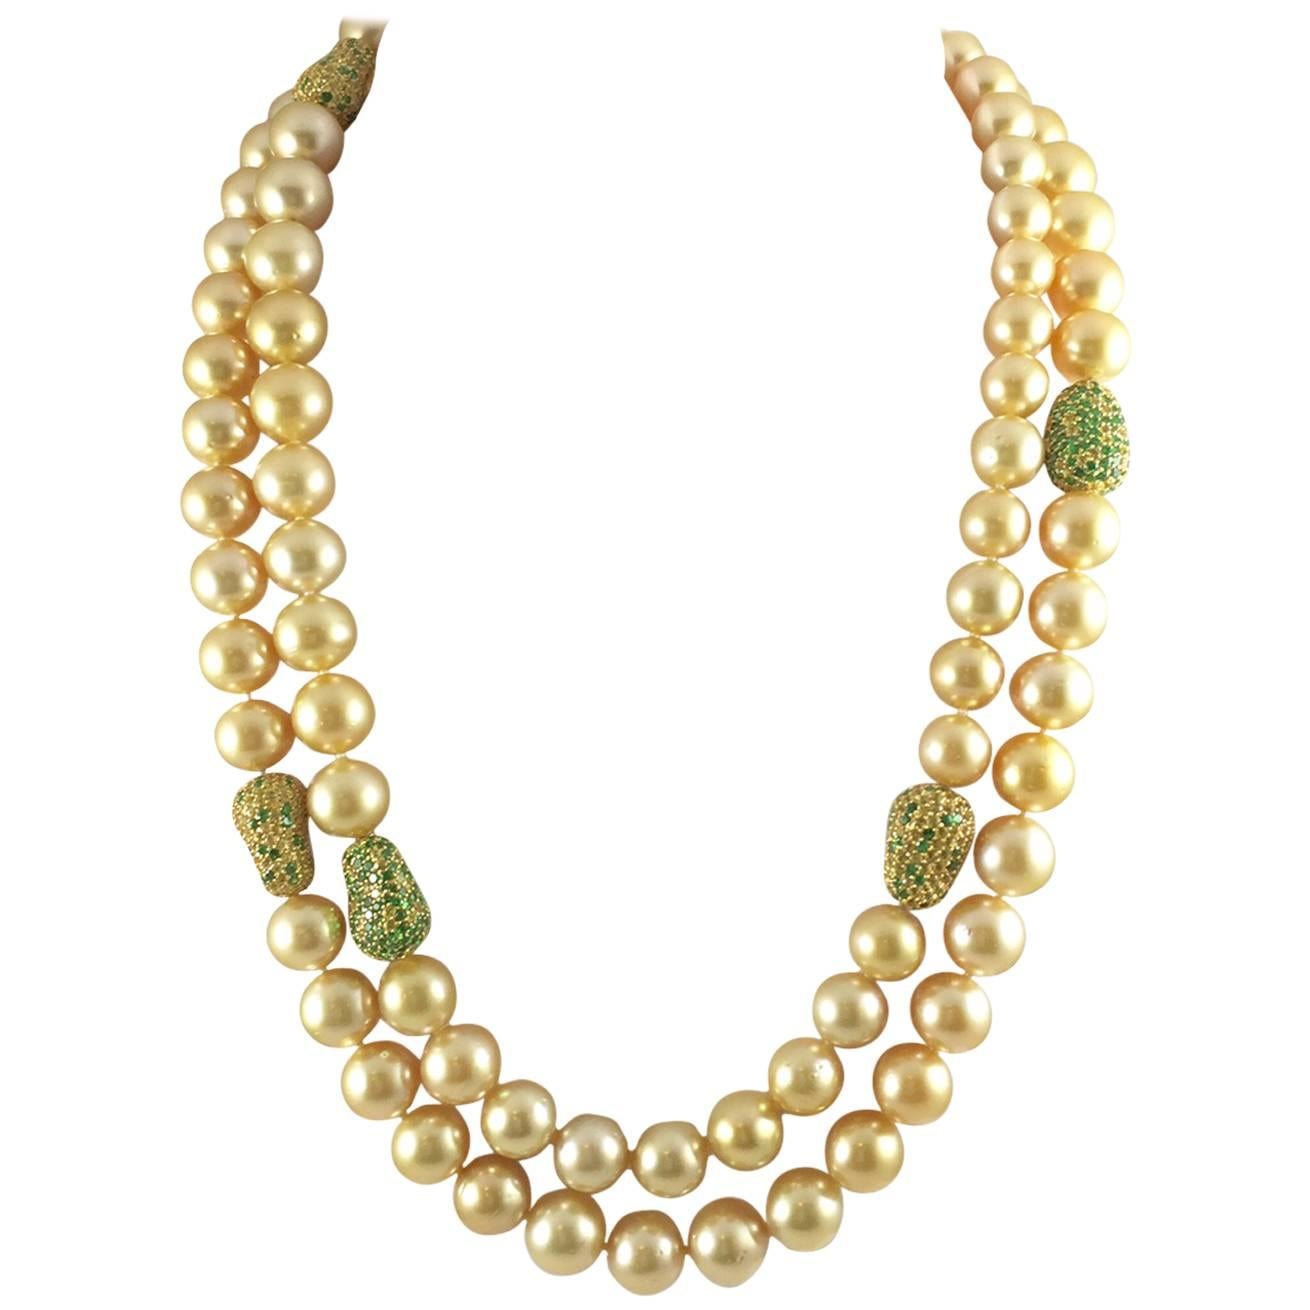 Glorious Golden South Sea Pearls For Sale